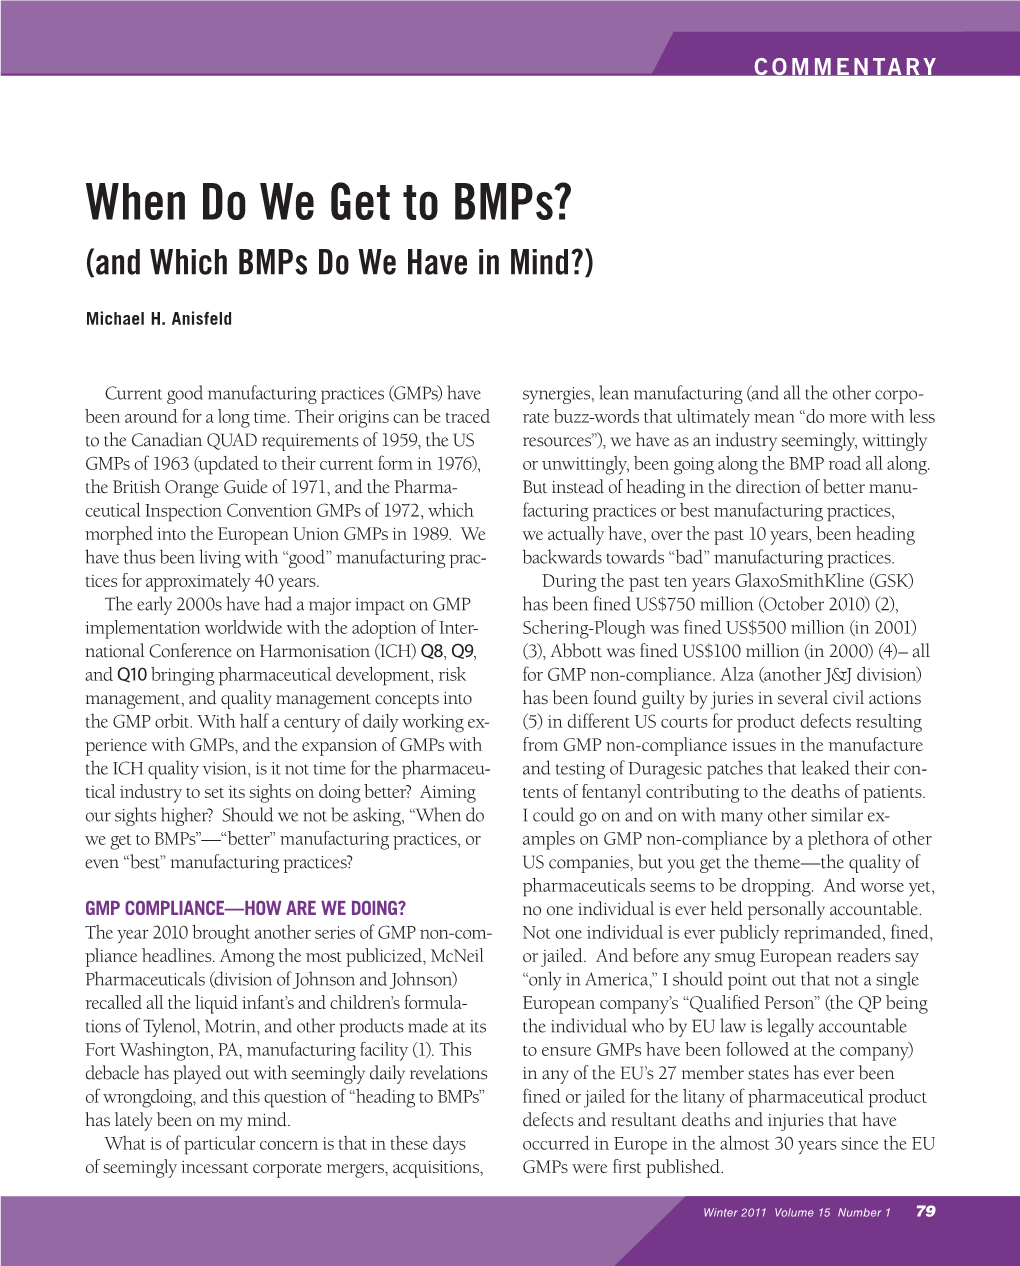 When Do We Get to Bmps? (And Which Bmps Do We Have in Mind?)